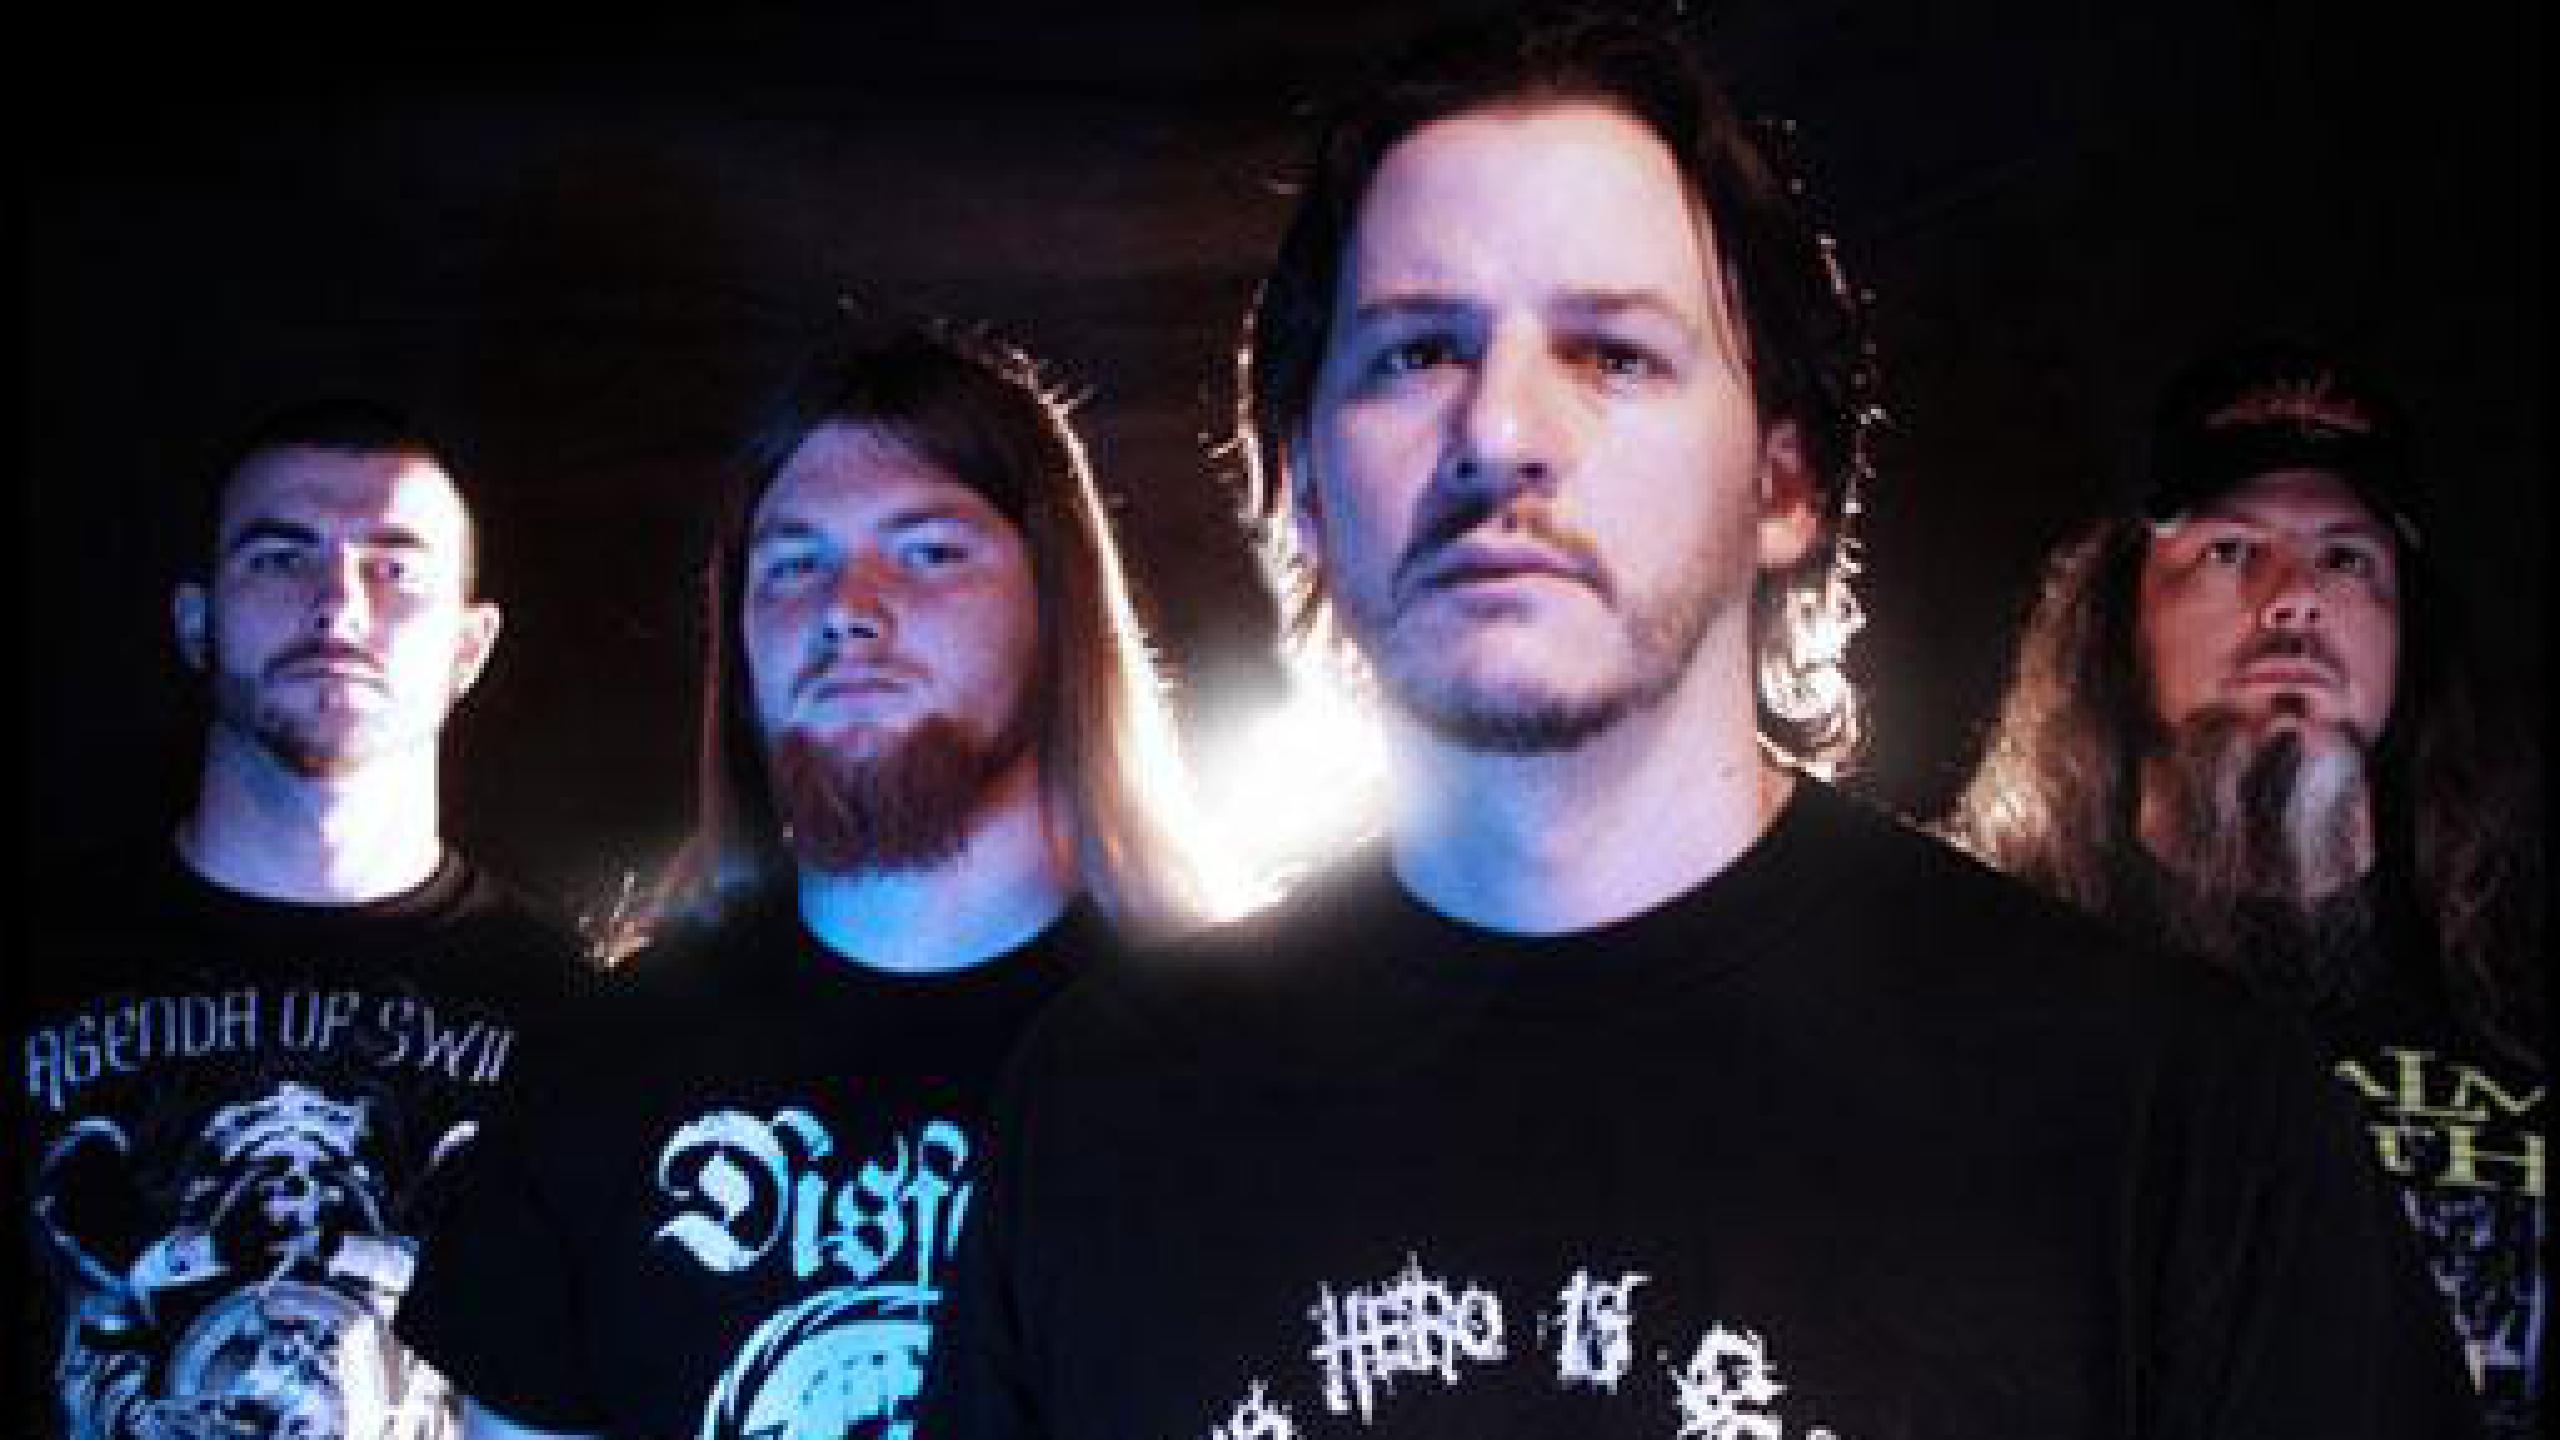 Misery Index tour dates 2022 2023. Misery Index tickets and concerts